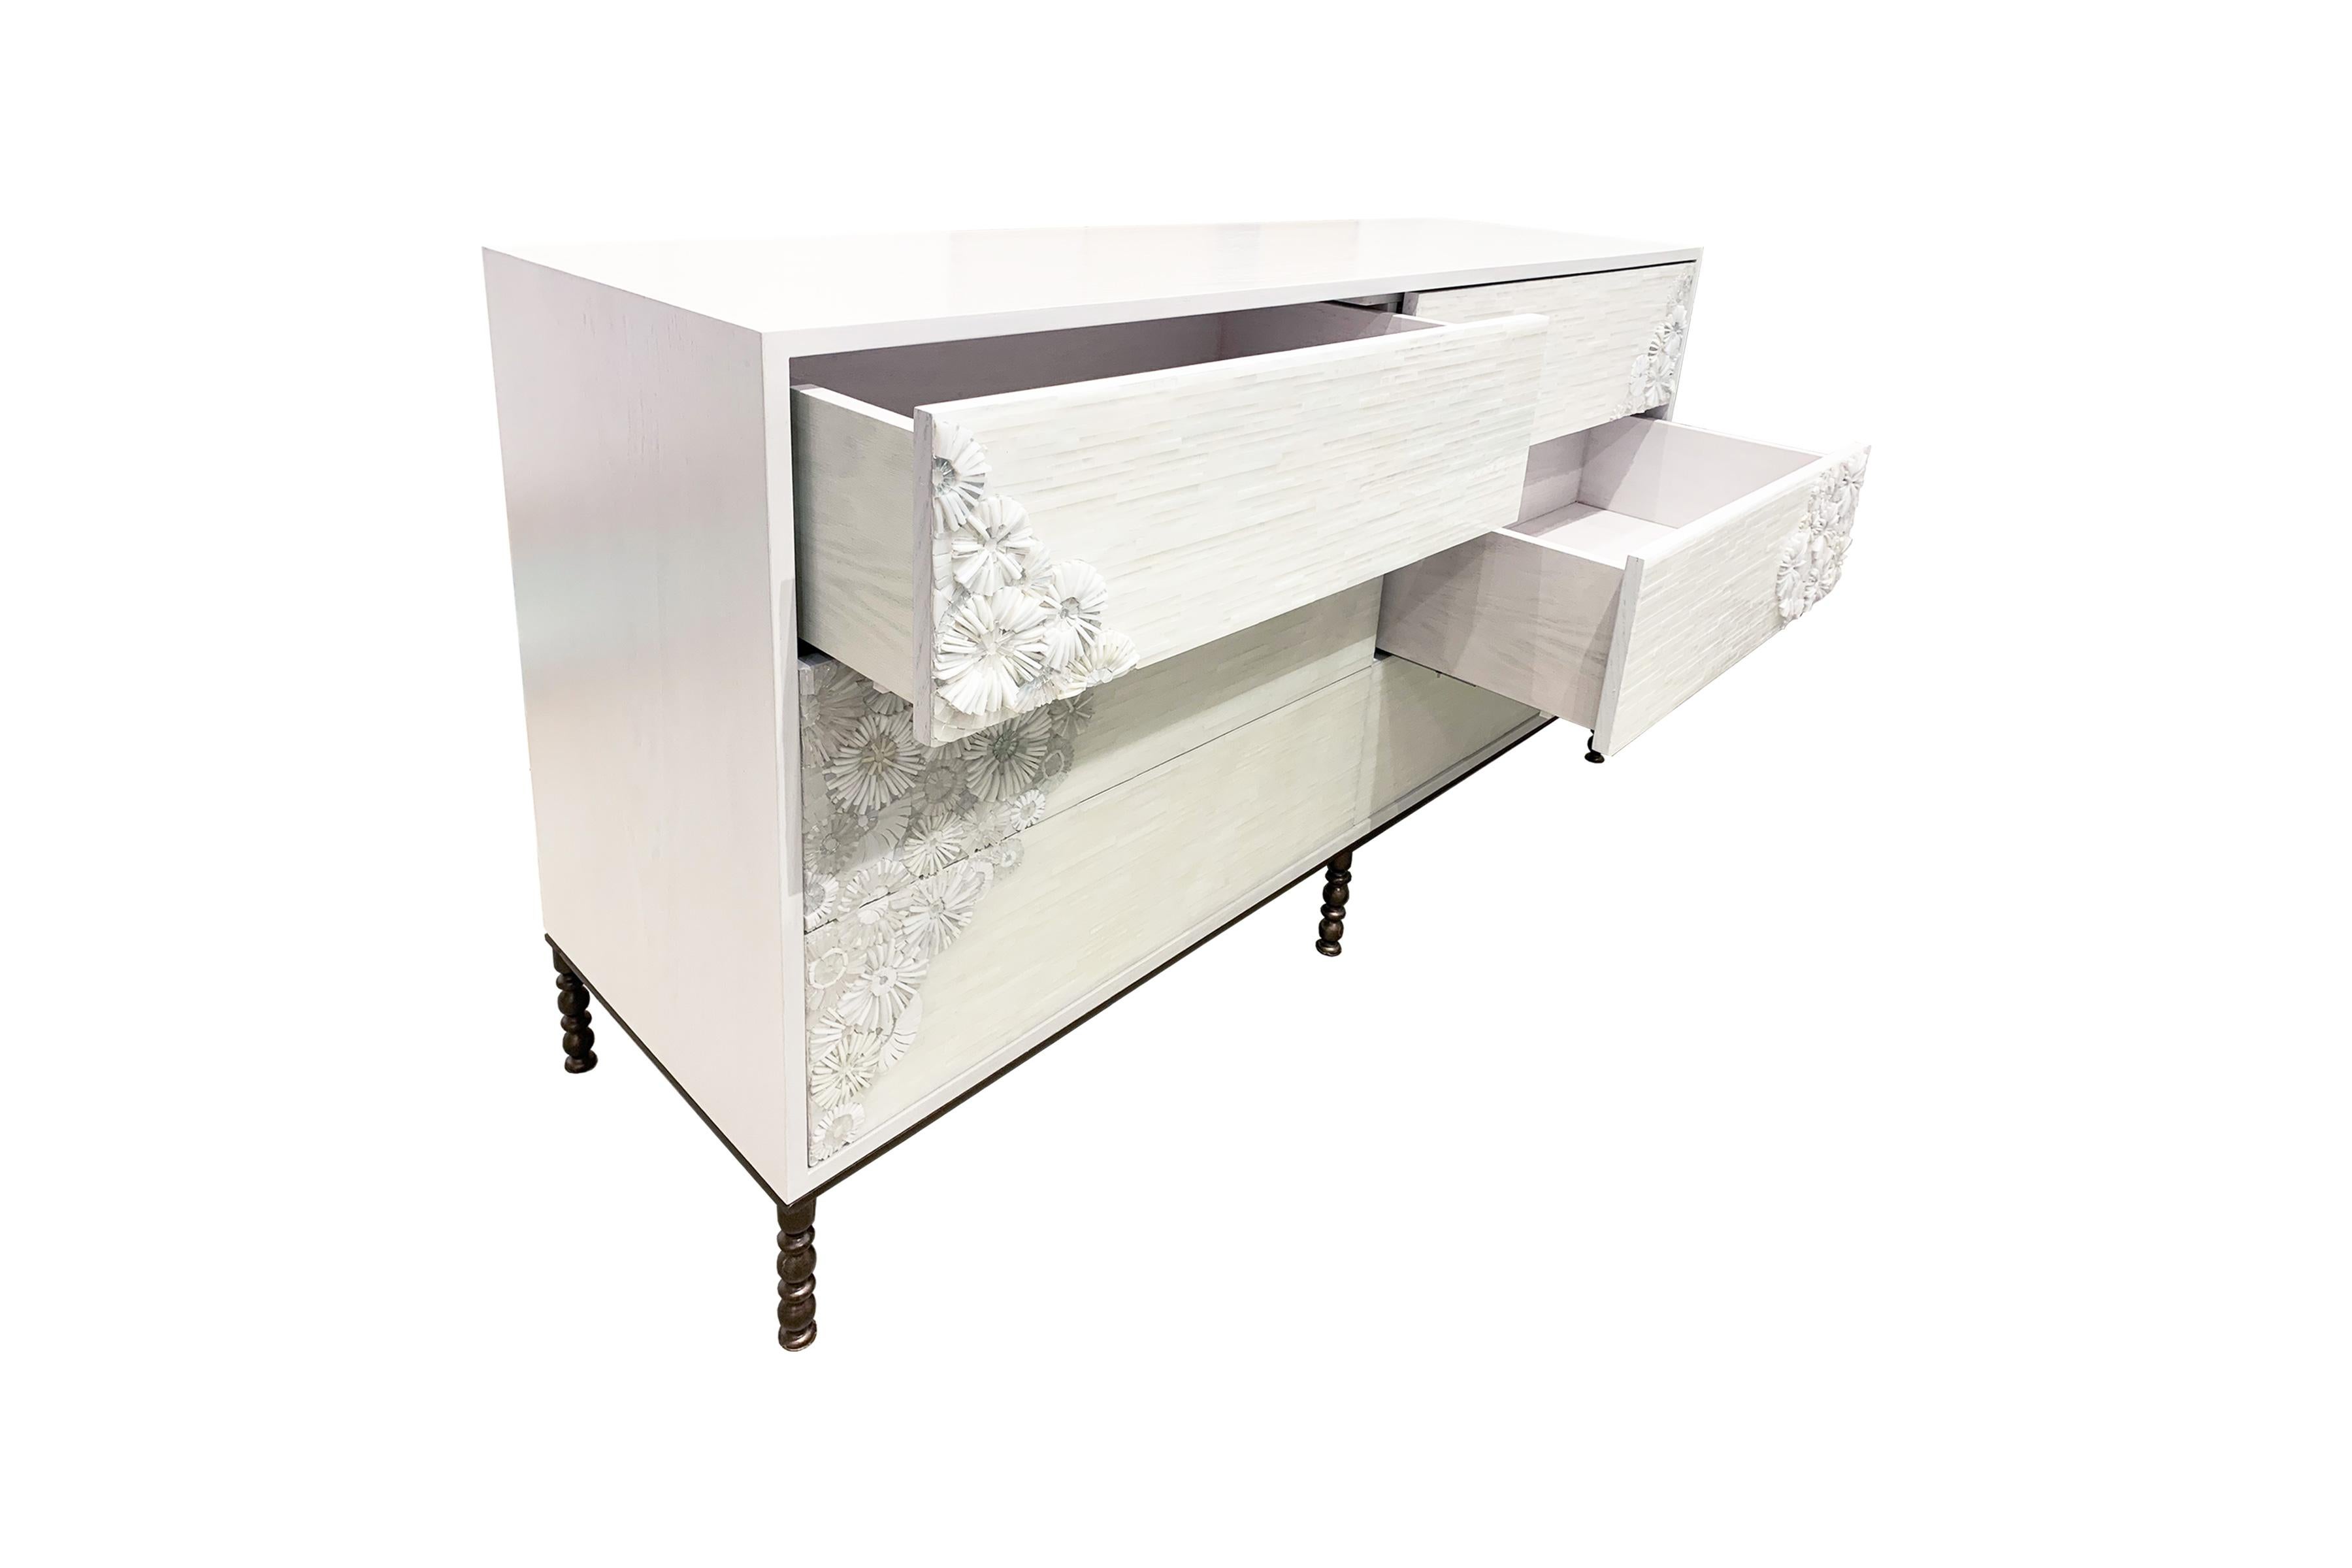 The Blossom chest of 6 drawers by Ercole Home has a 6-drawer front, with white wash finish on oak wood.
Handcut glass mosaic in variety shades of white and ivory decorate the surface in Blossom and stipe mosaic pattern.
The decorative metal base